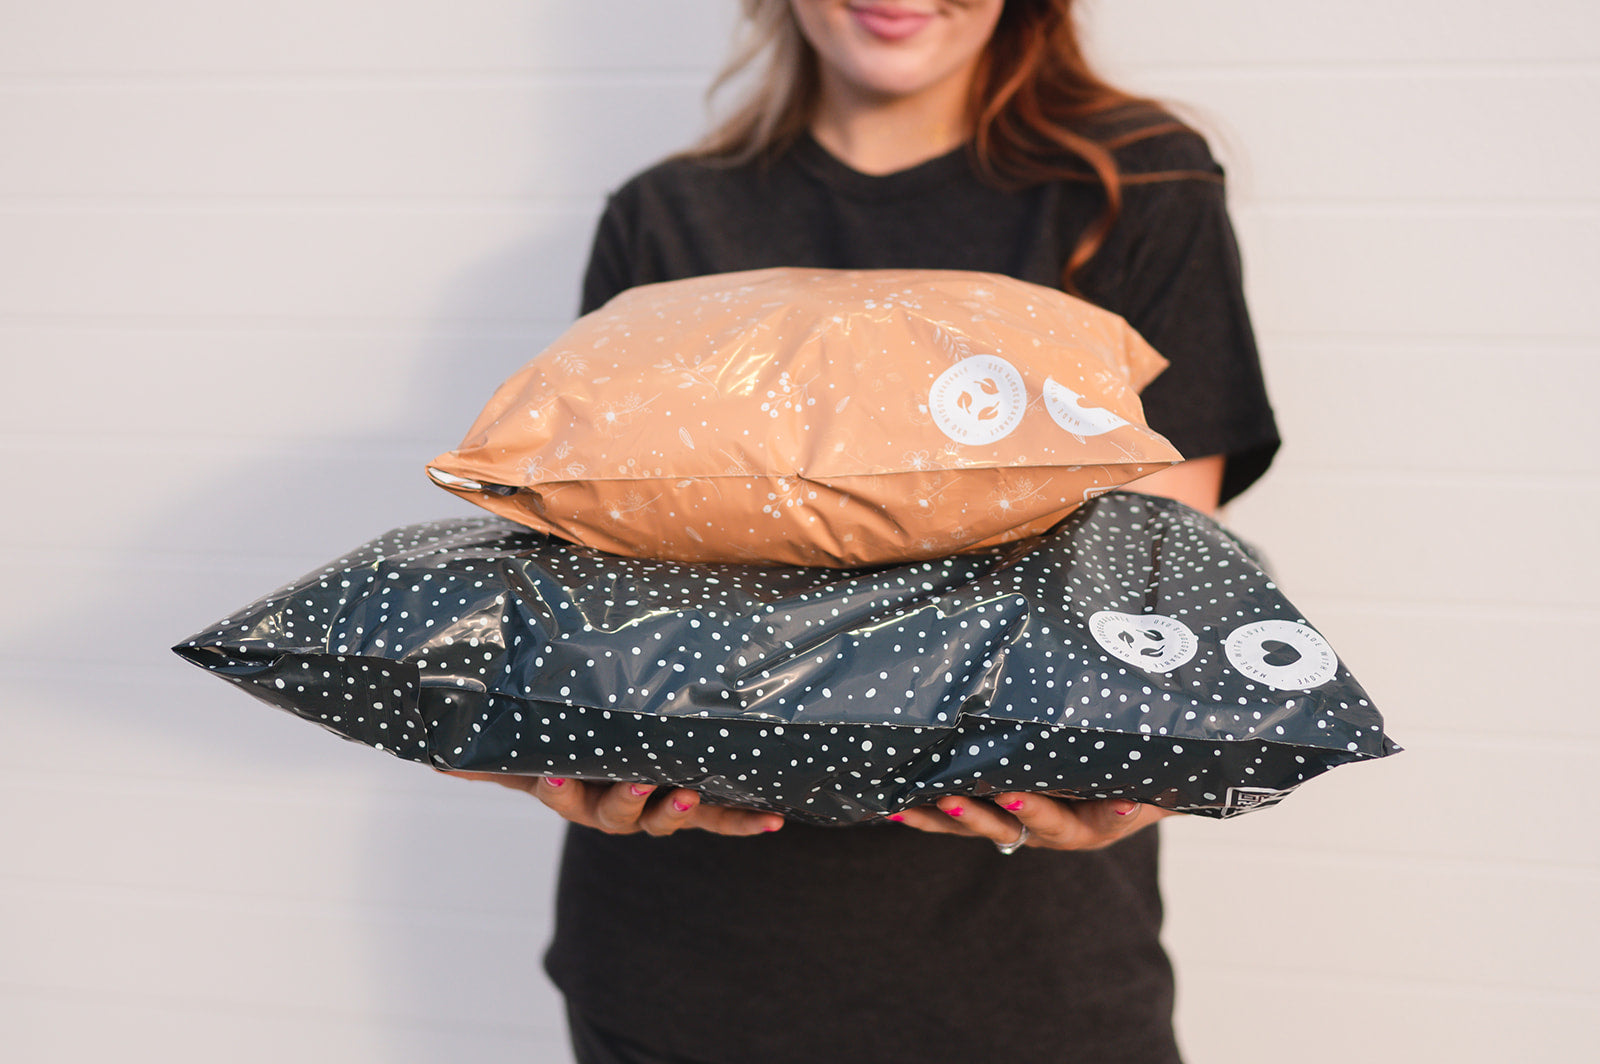 A woman holding two Floral 2D Chestnut Biodegradable Mailers 12" x 15.5" with recyclable polka dot patterns, from impack.co.